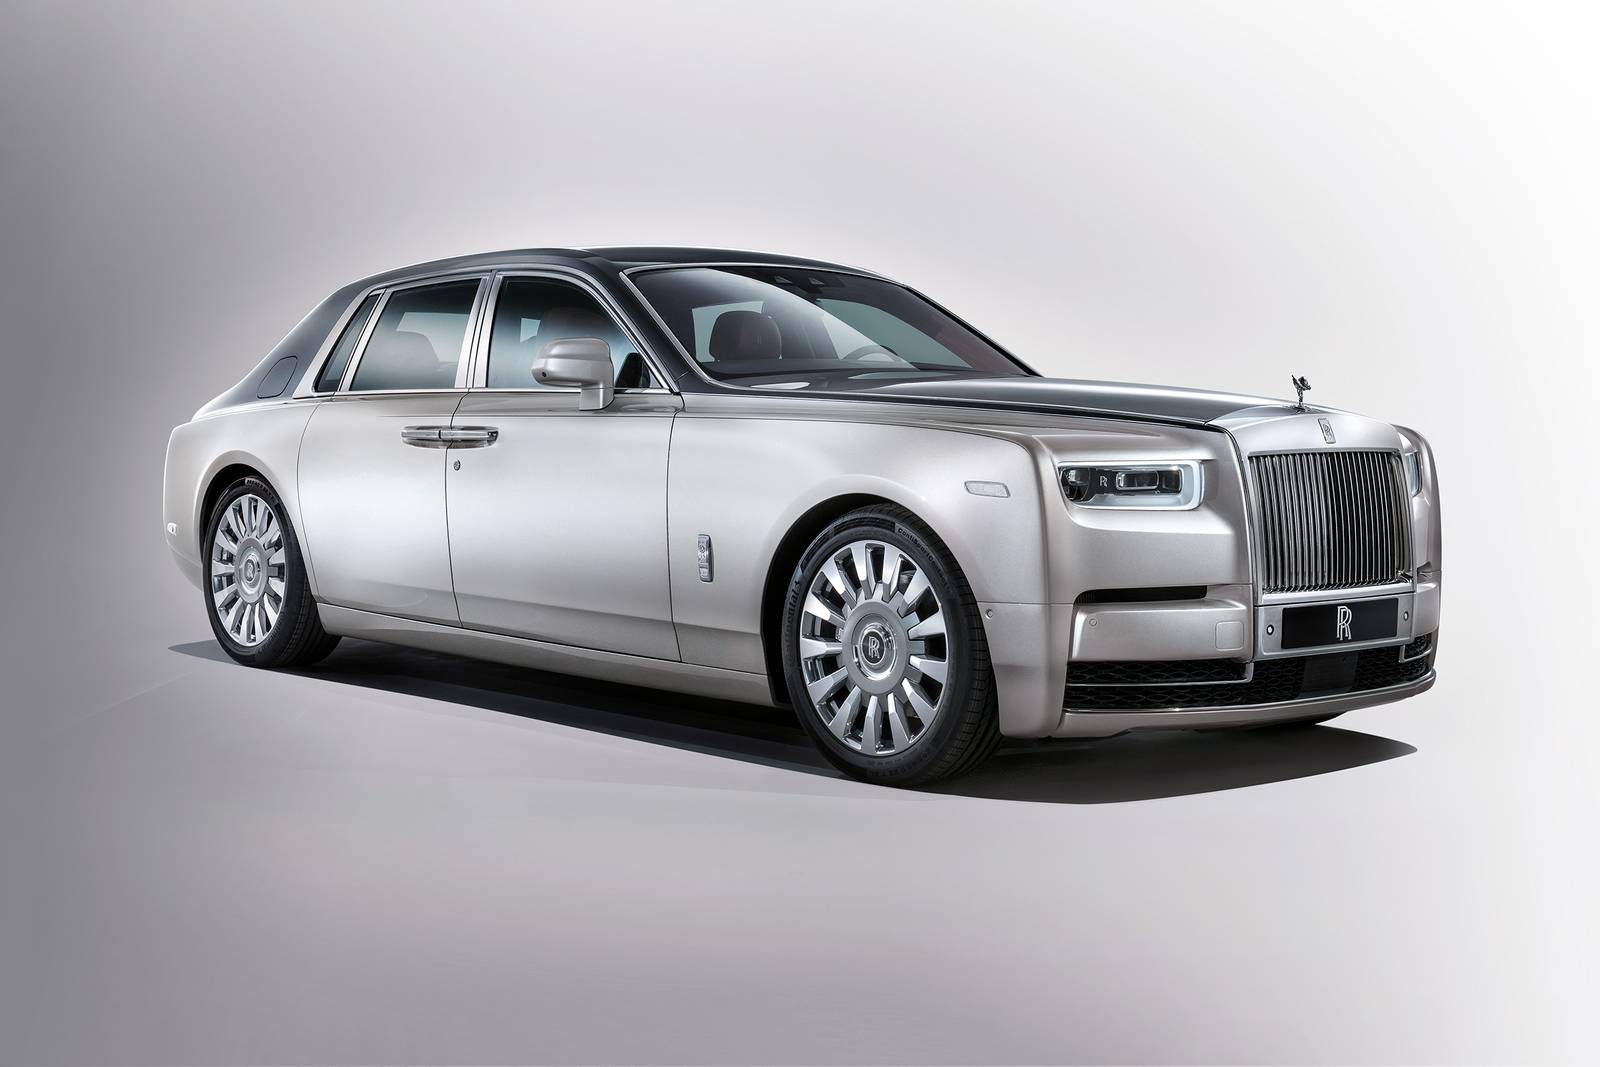 2022 Rolls-Royce Phantom Prices, Reviews, and Pictures | Edmunds